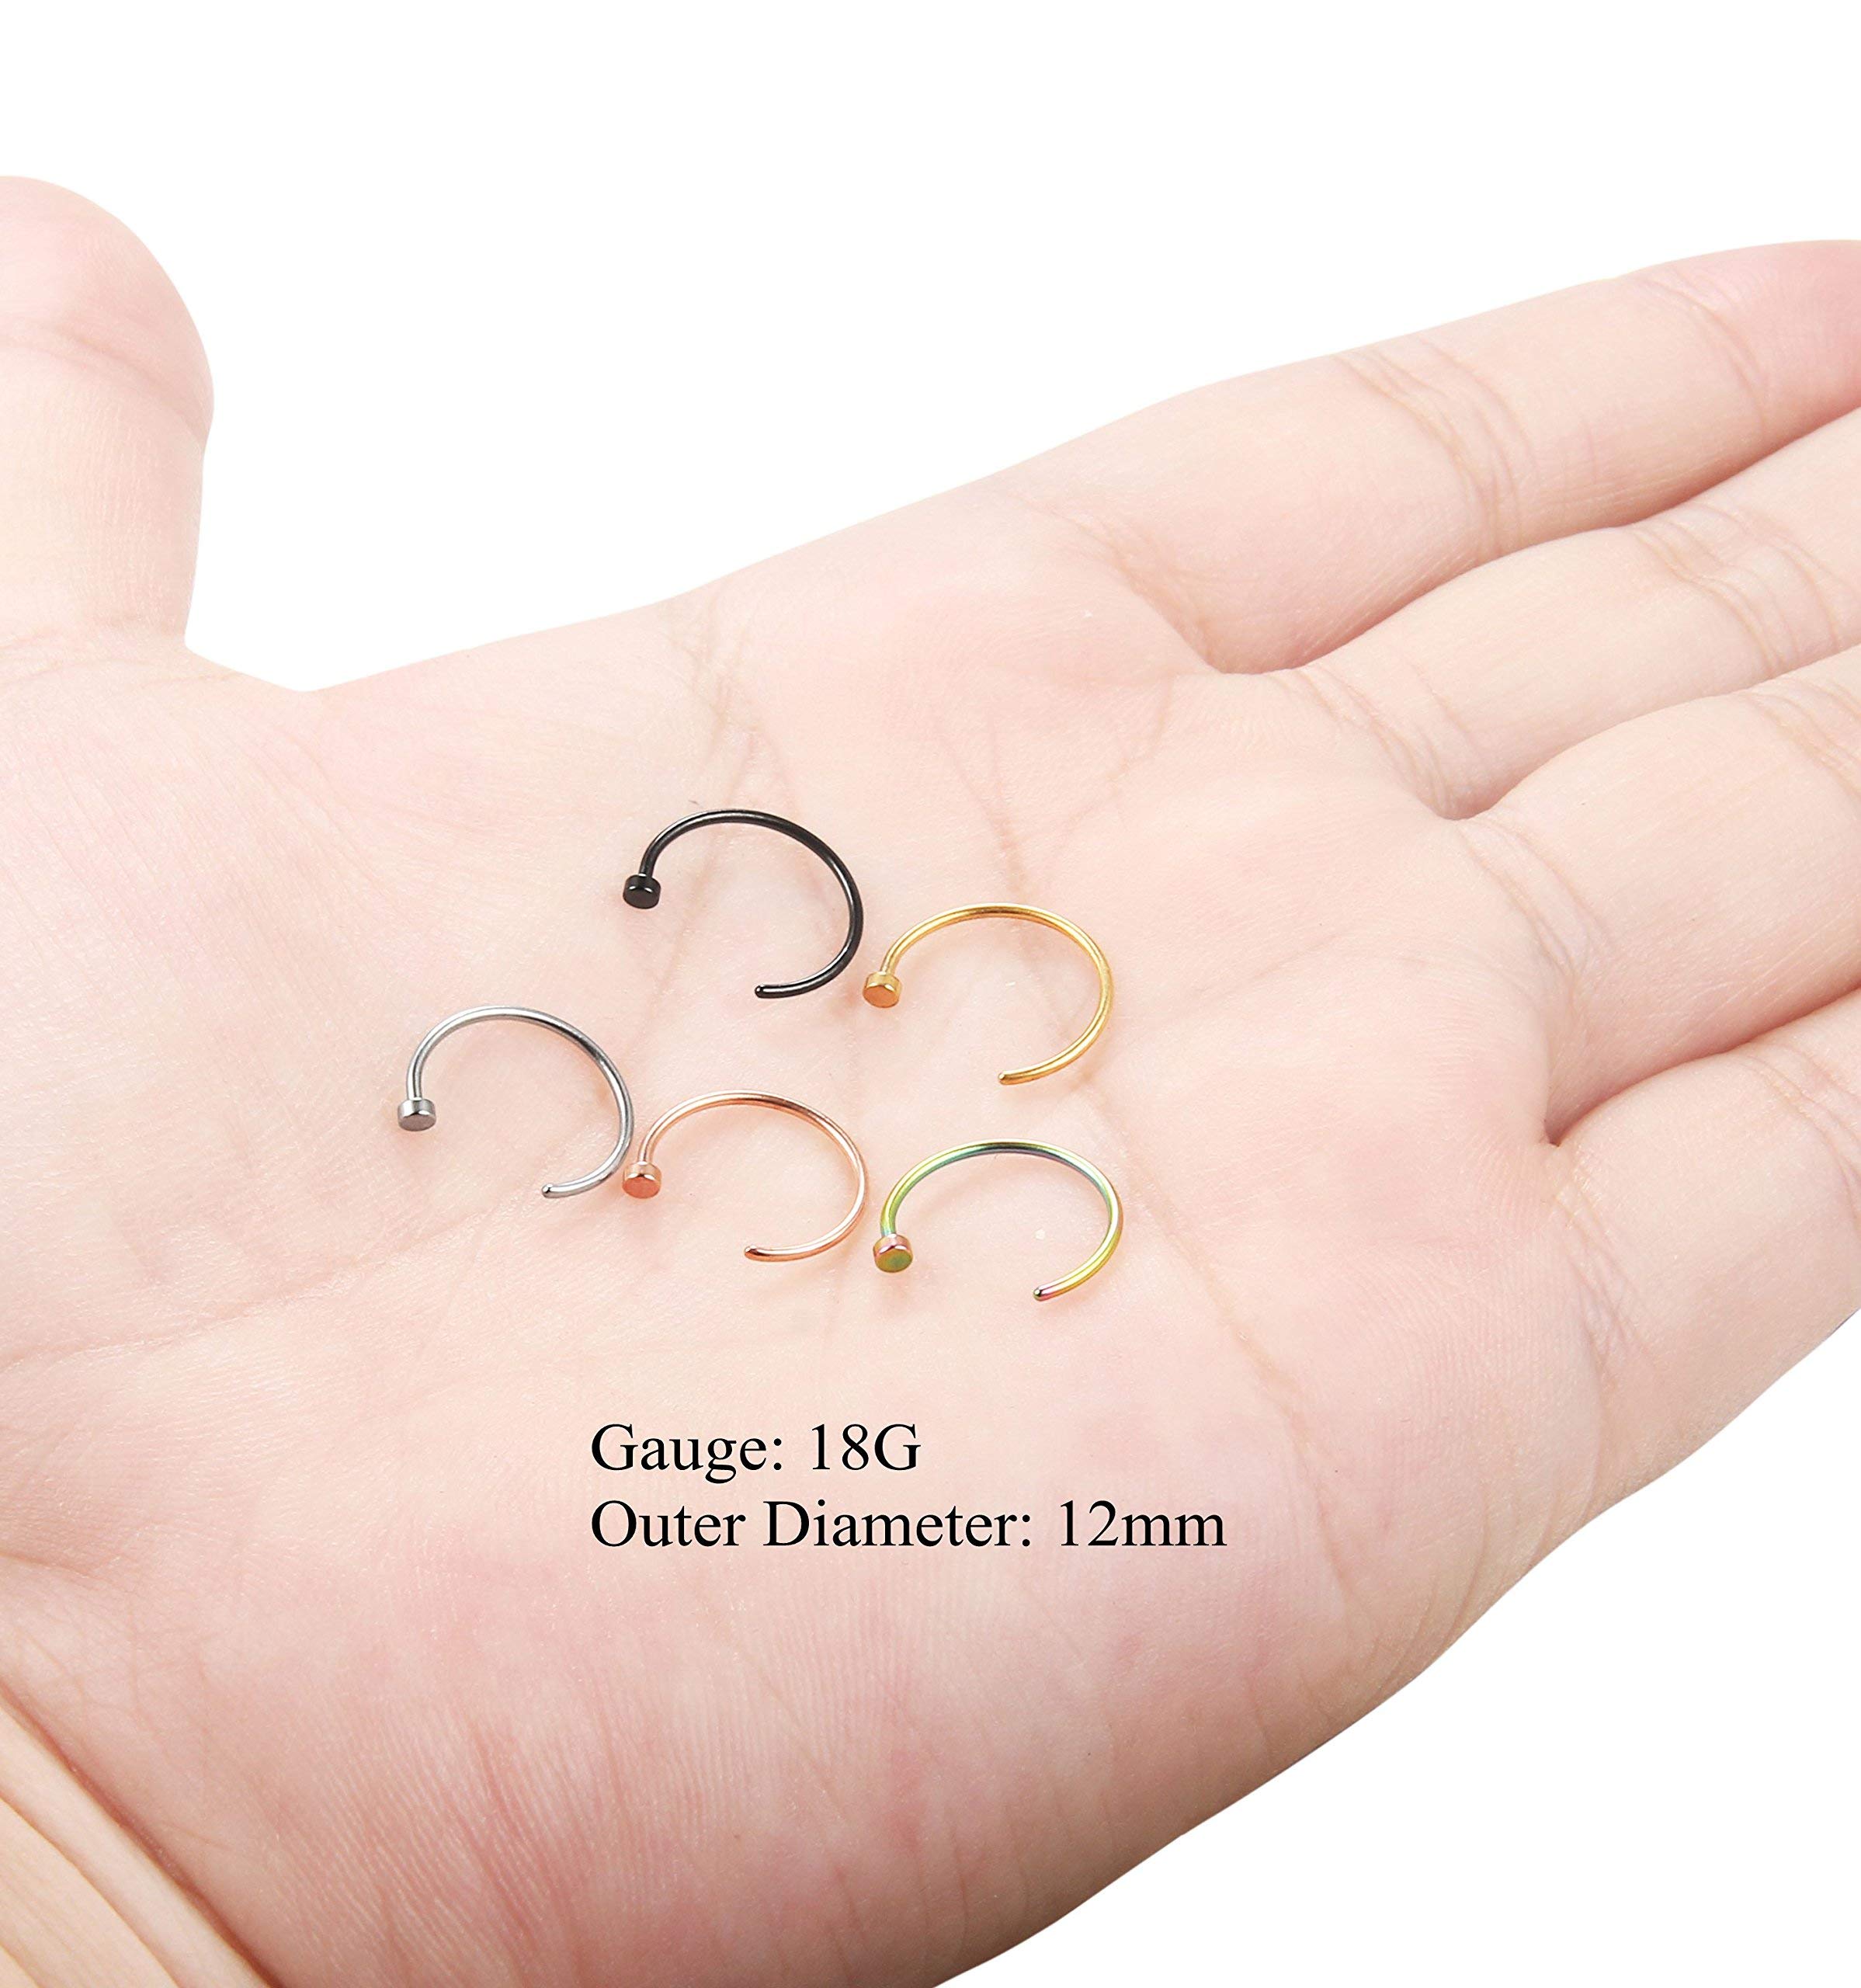 Jstyle 18G 20G 5 Pcs a Set 316L Stainless Steel Nose Rings Hoop Nose Piercing Body Jewelry